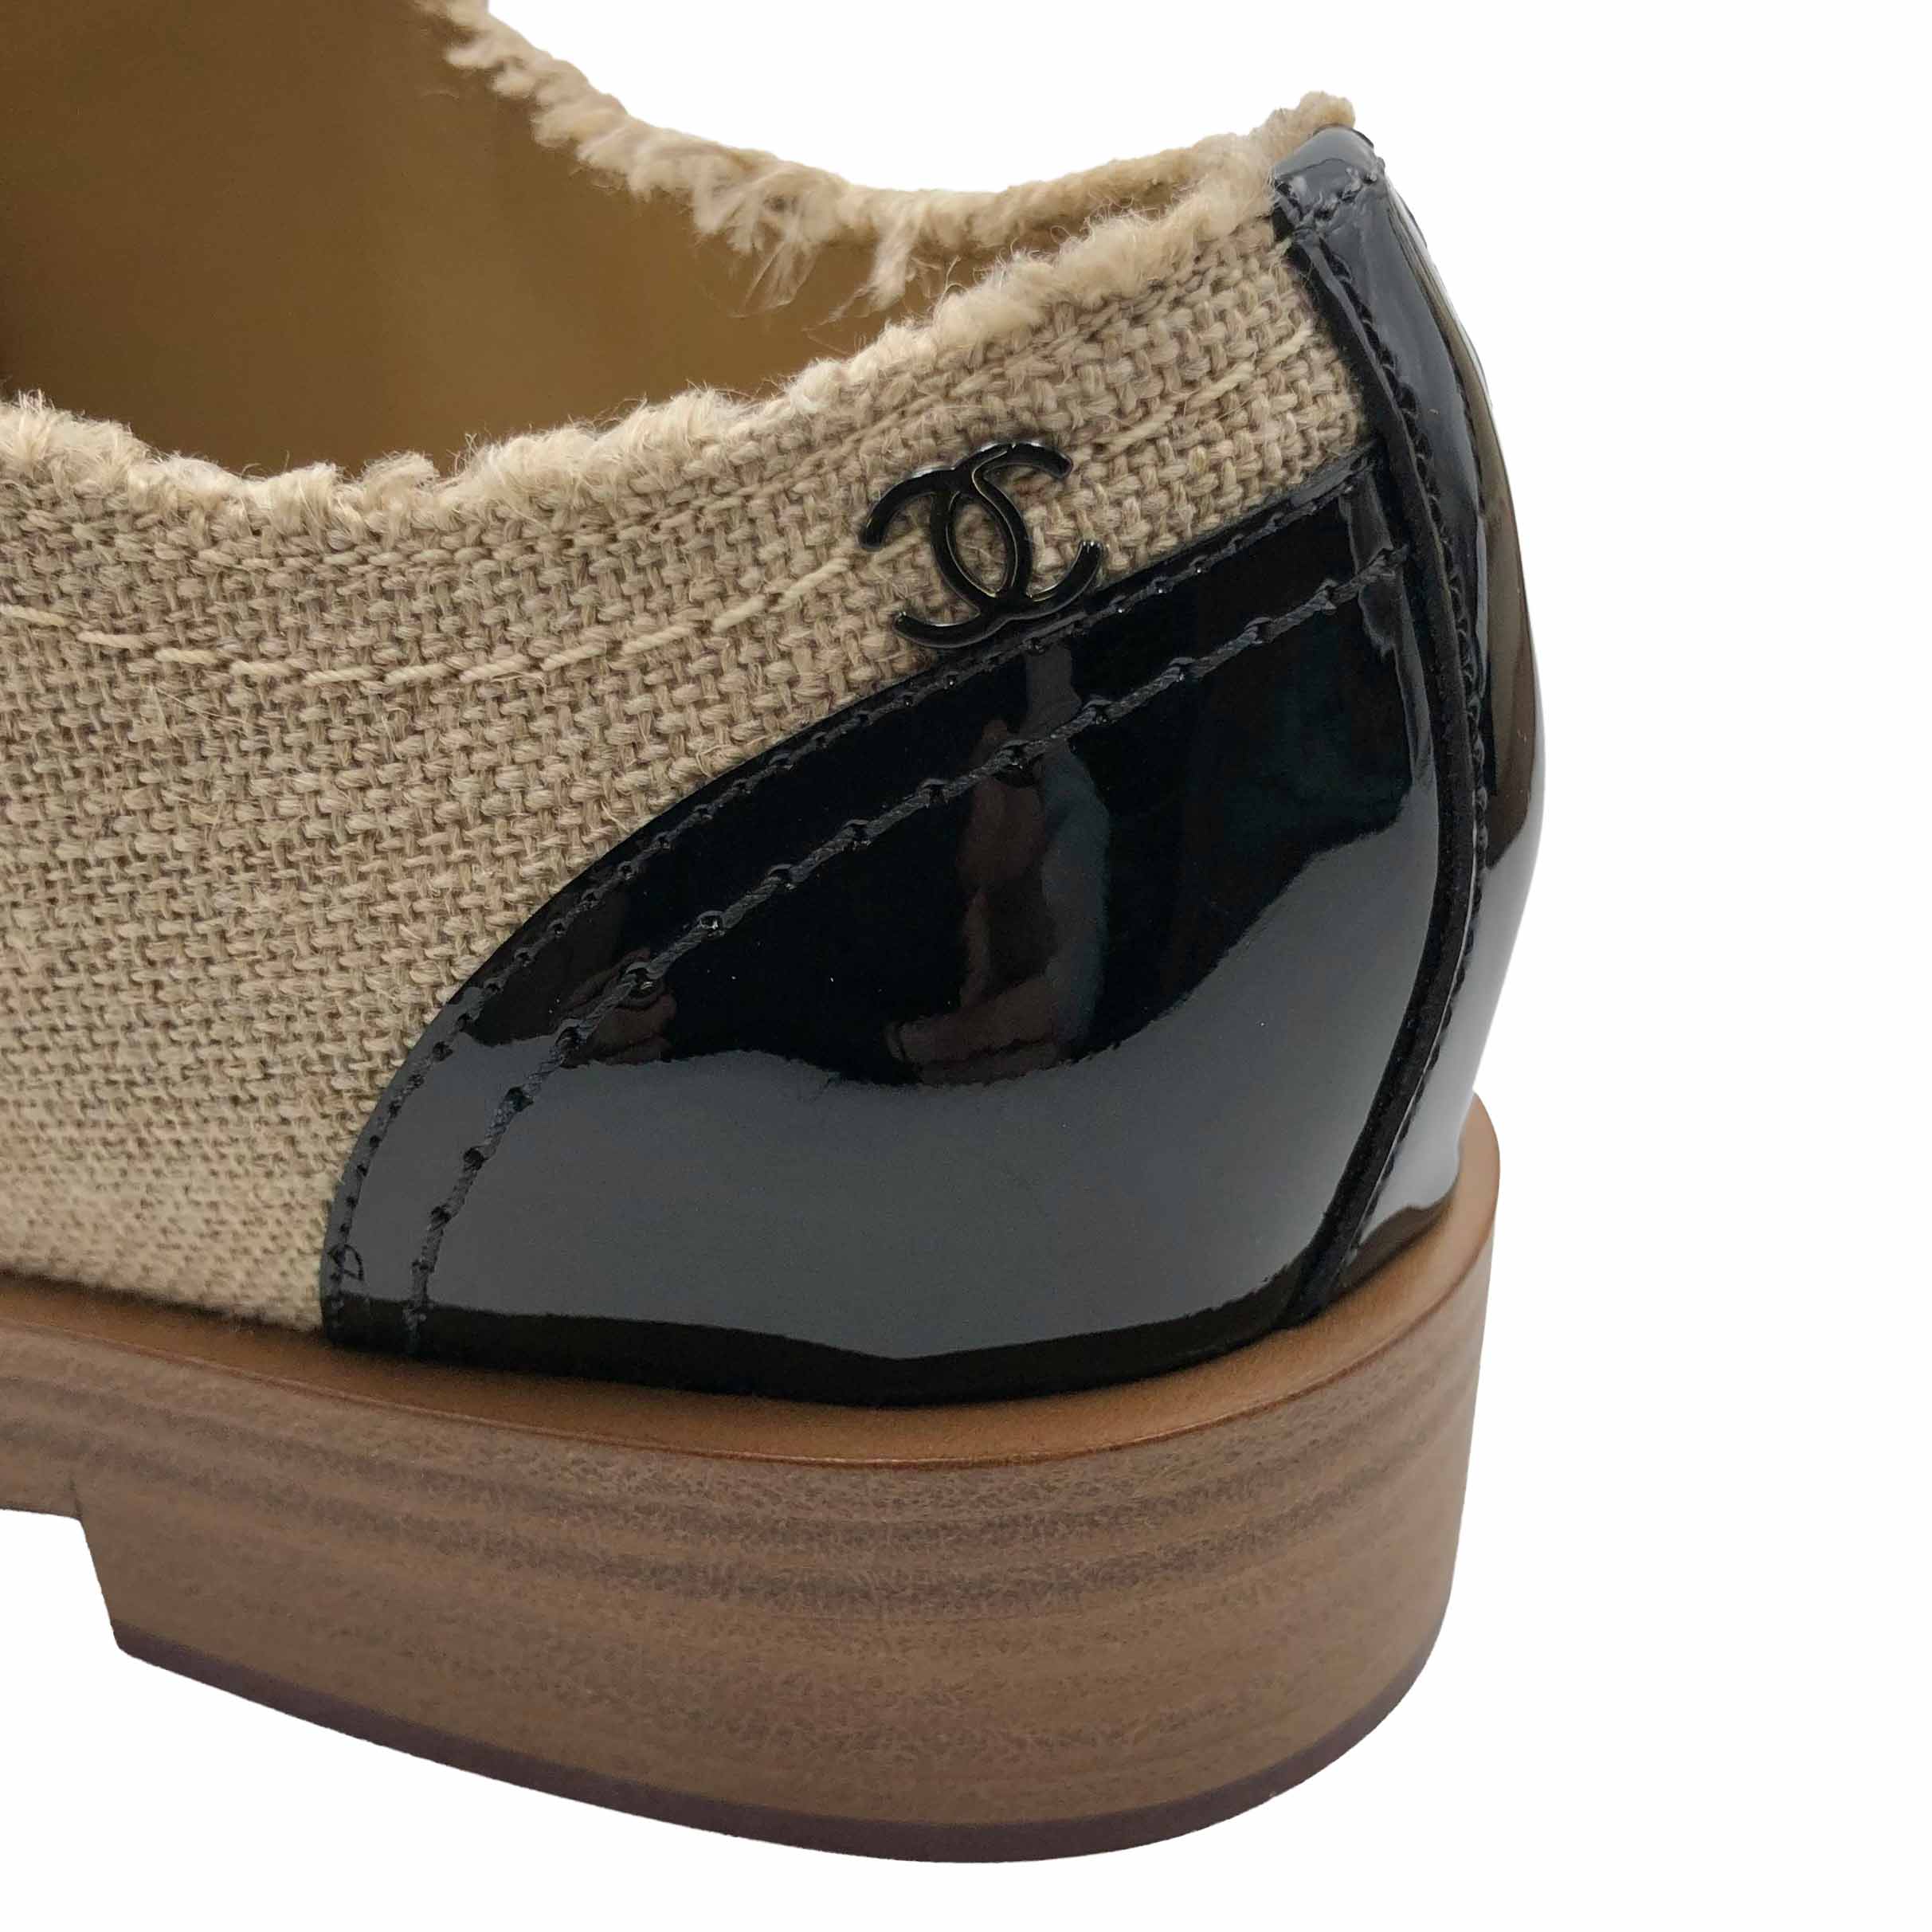 Chanel Oxford shoes in hessian with black patent toes - DOWNTOWN